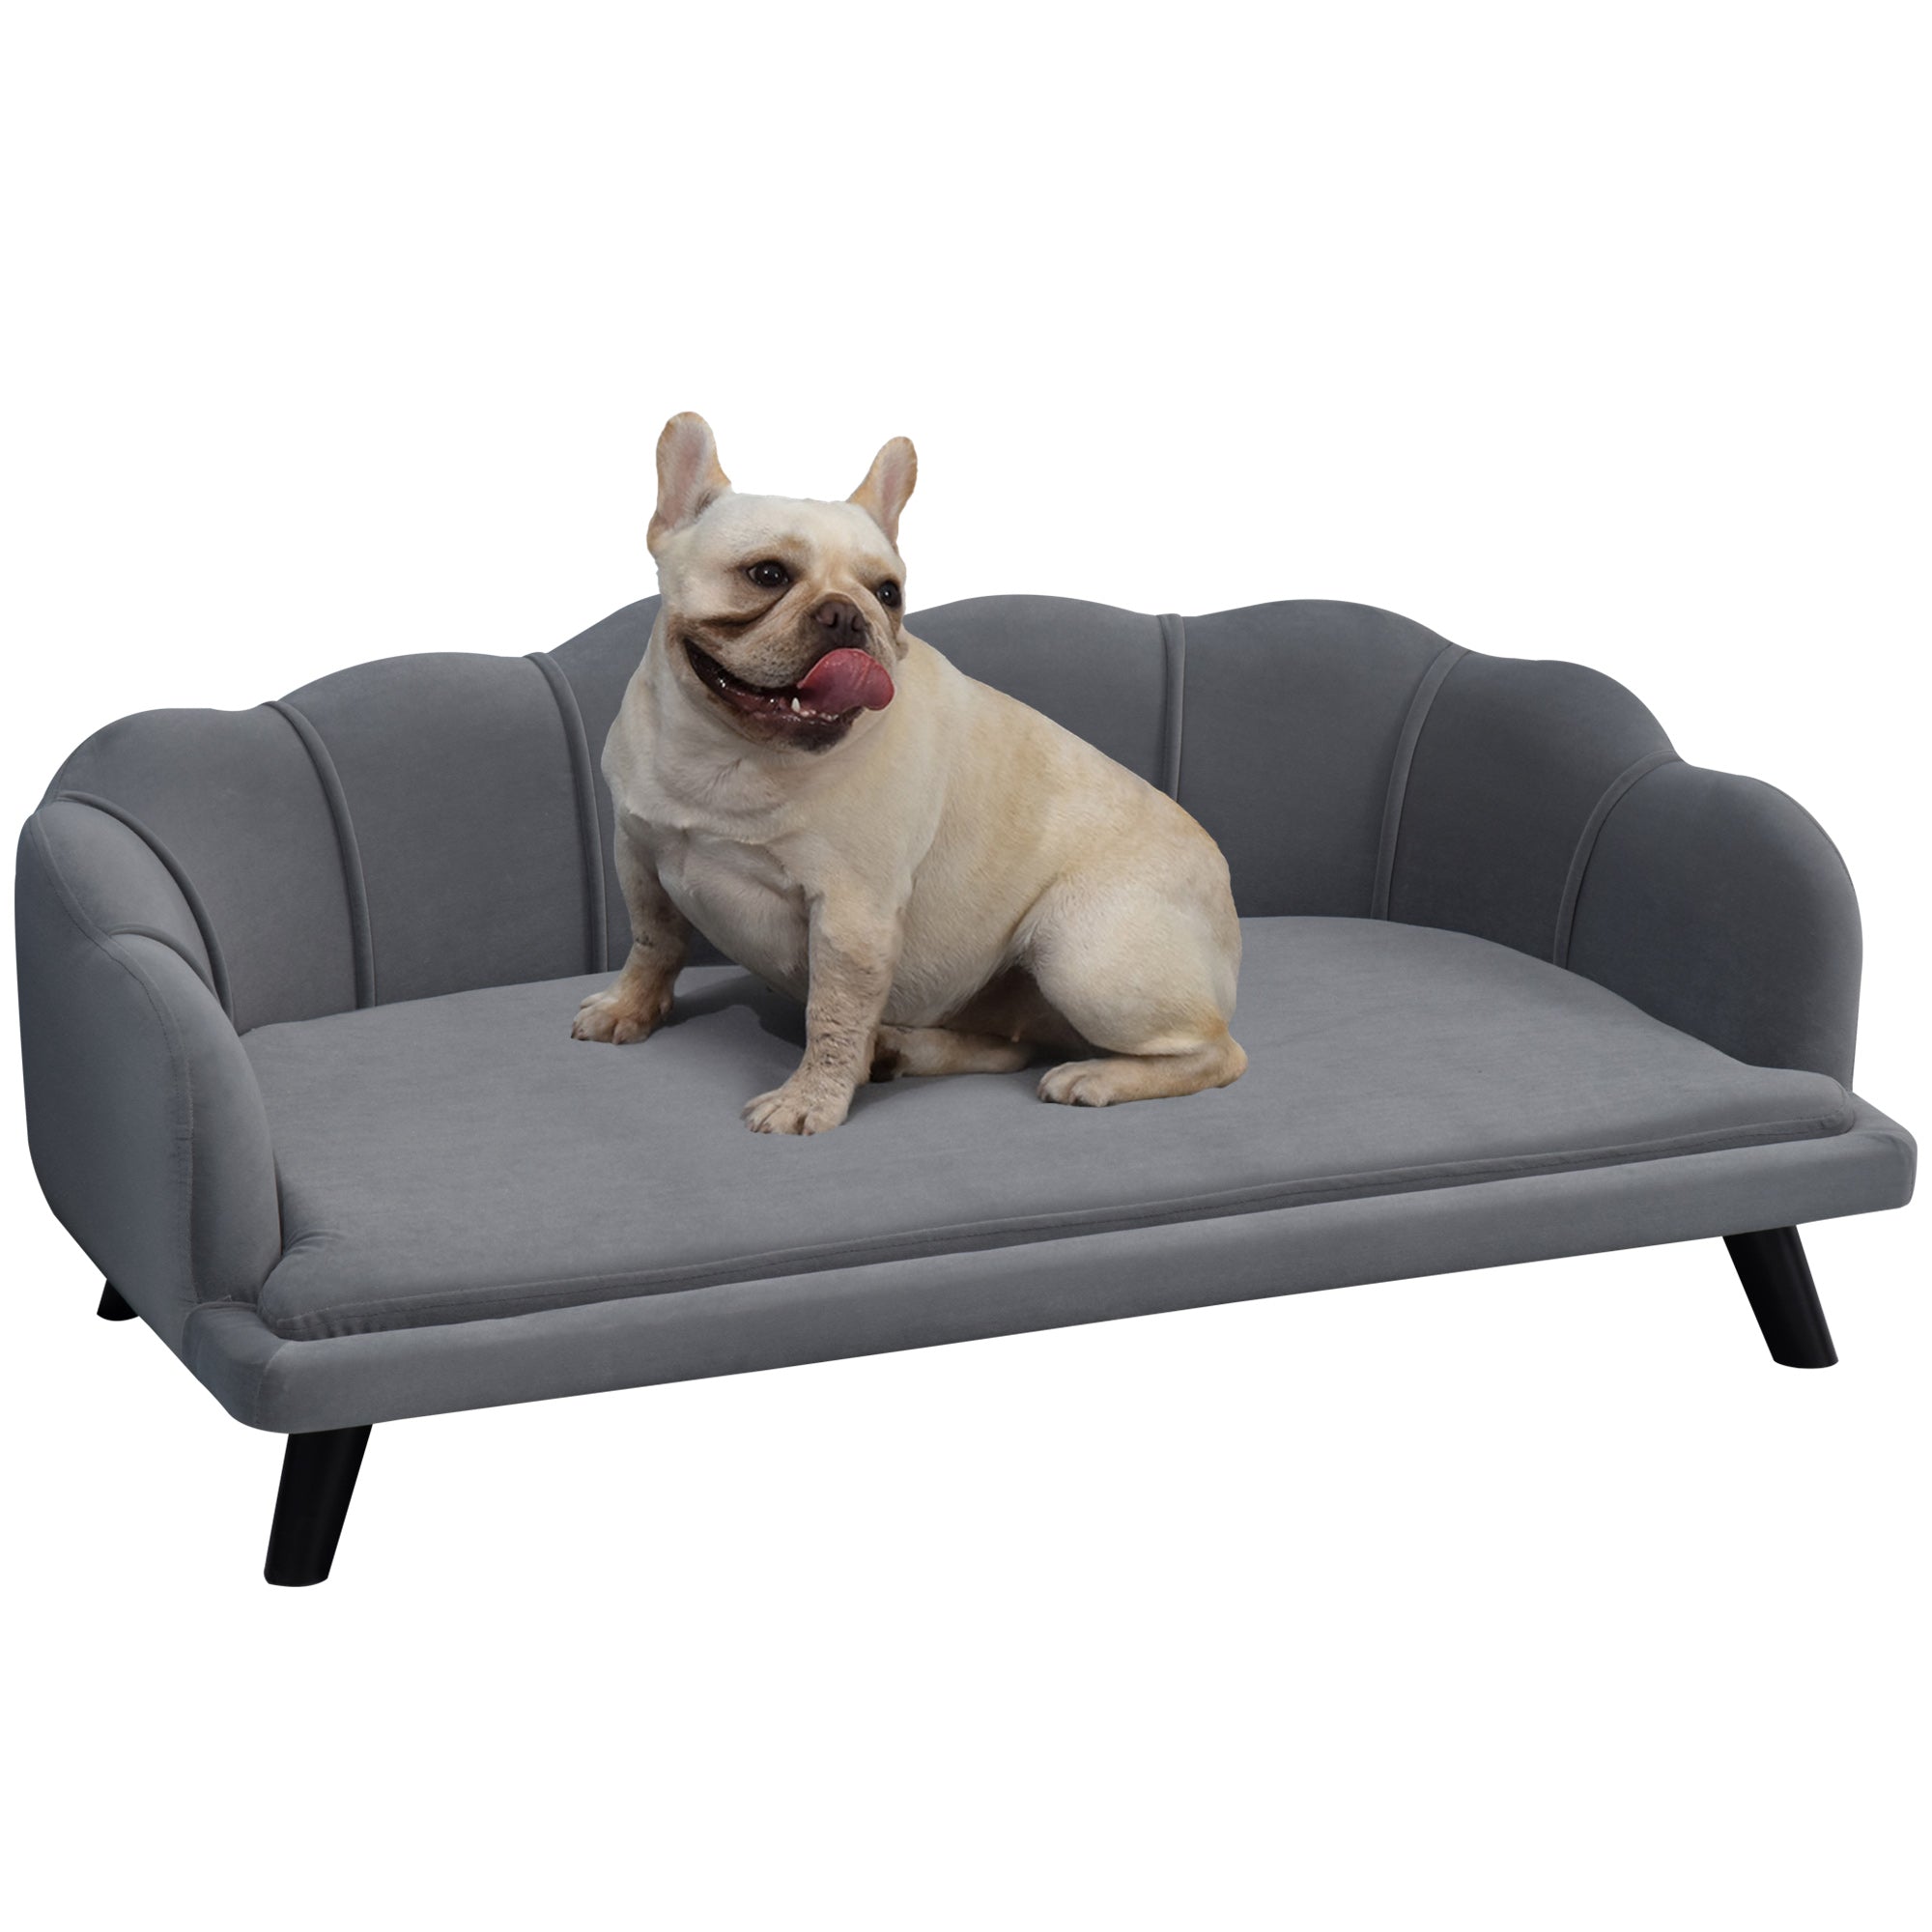 PawHut Dog Sofa for Medium Large Dogs, Shell Shaped Pet Couch Bed with Legs Cushion Washable Cover, Grey